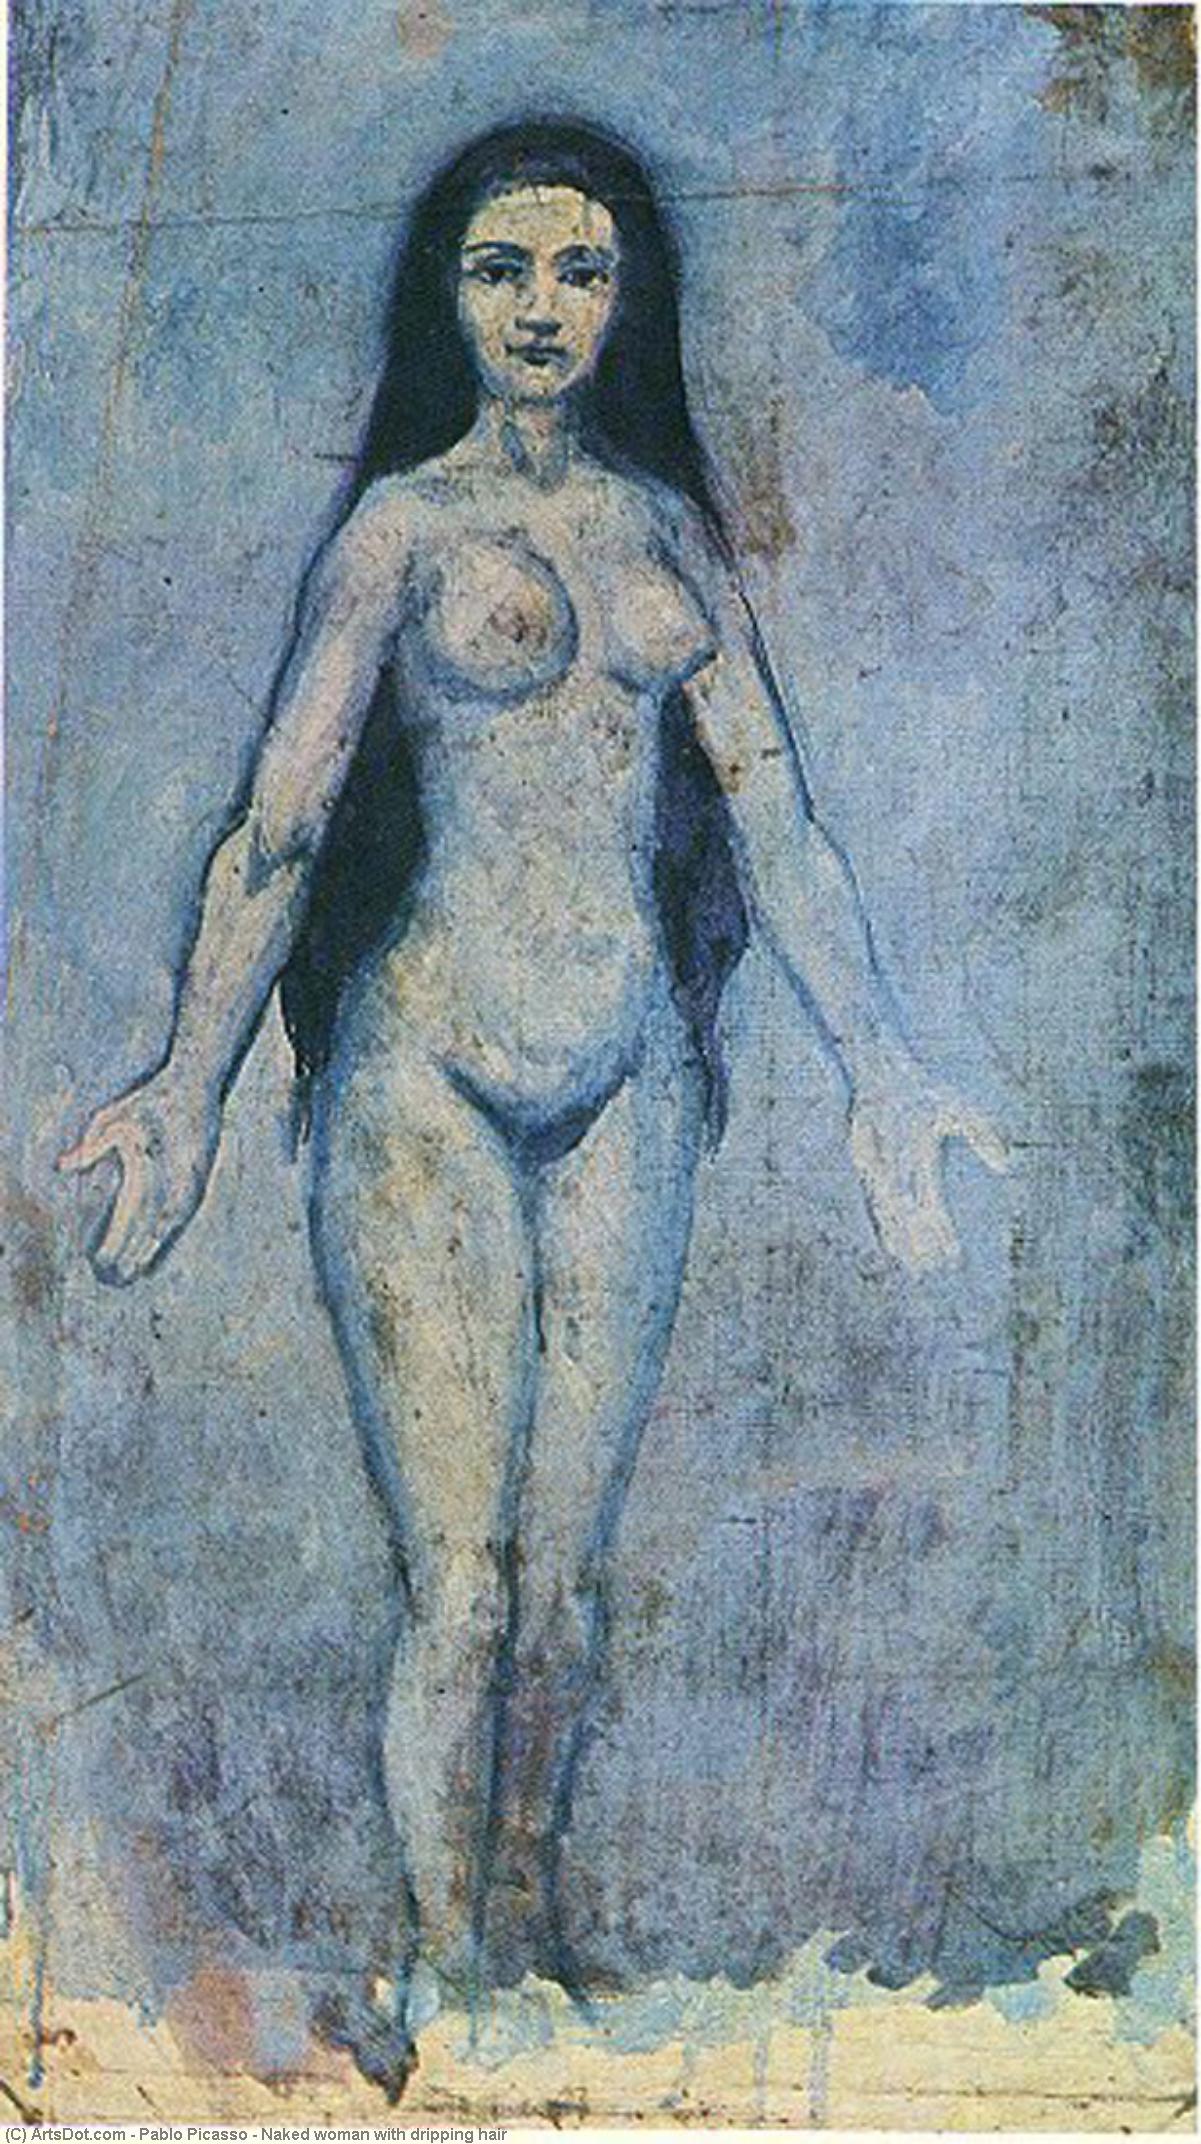 WikiOO.org - 백과 사전 - 회화, 삽화 Pablo Picasso - Naked woman with dripping hair